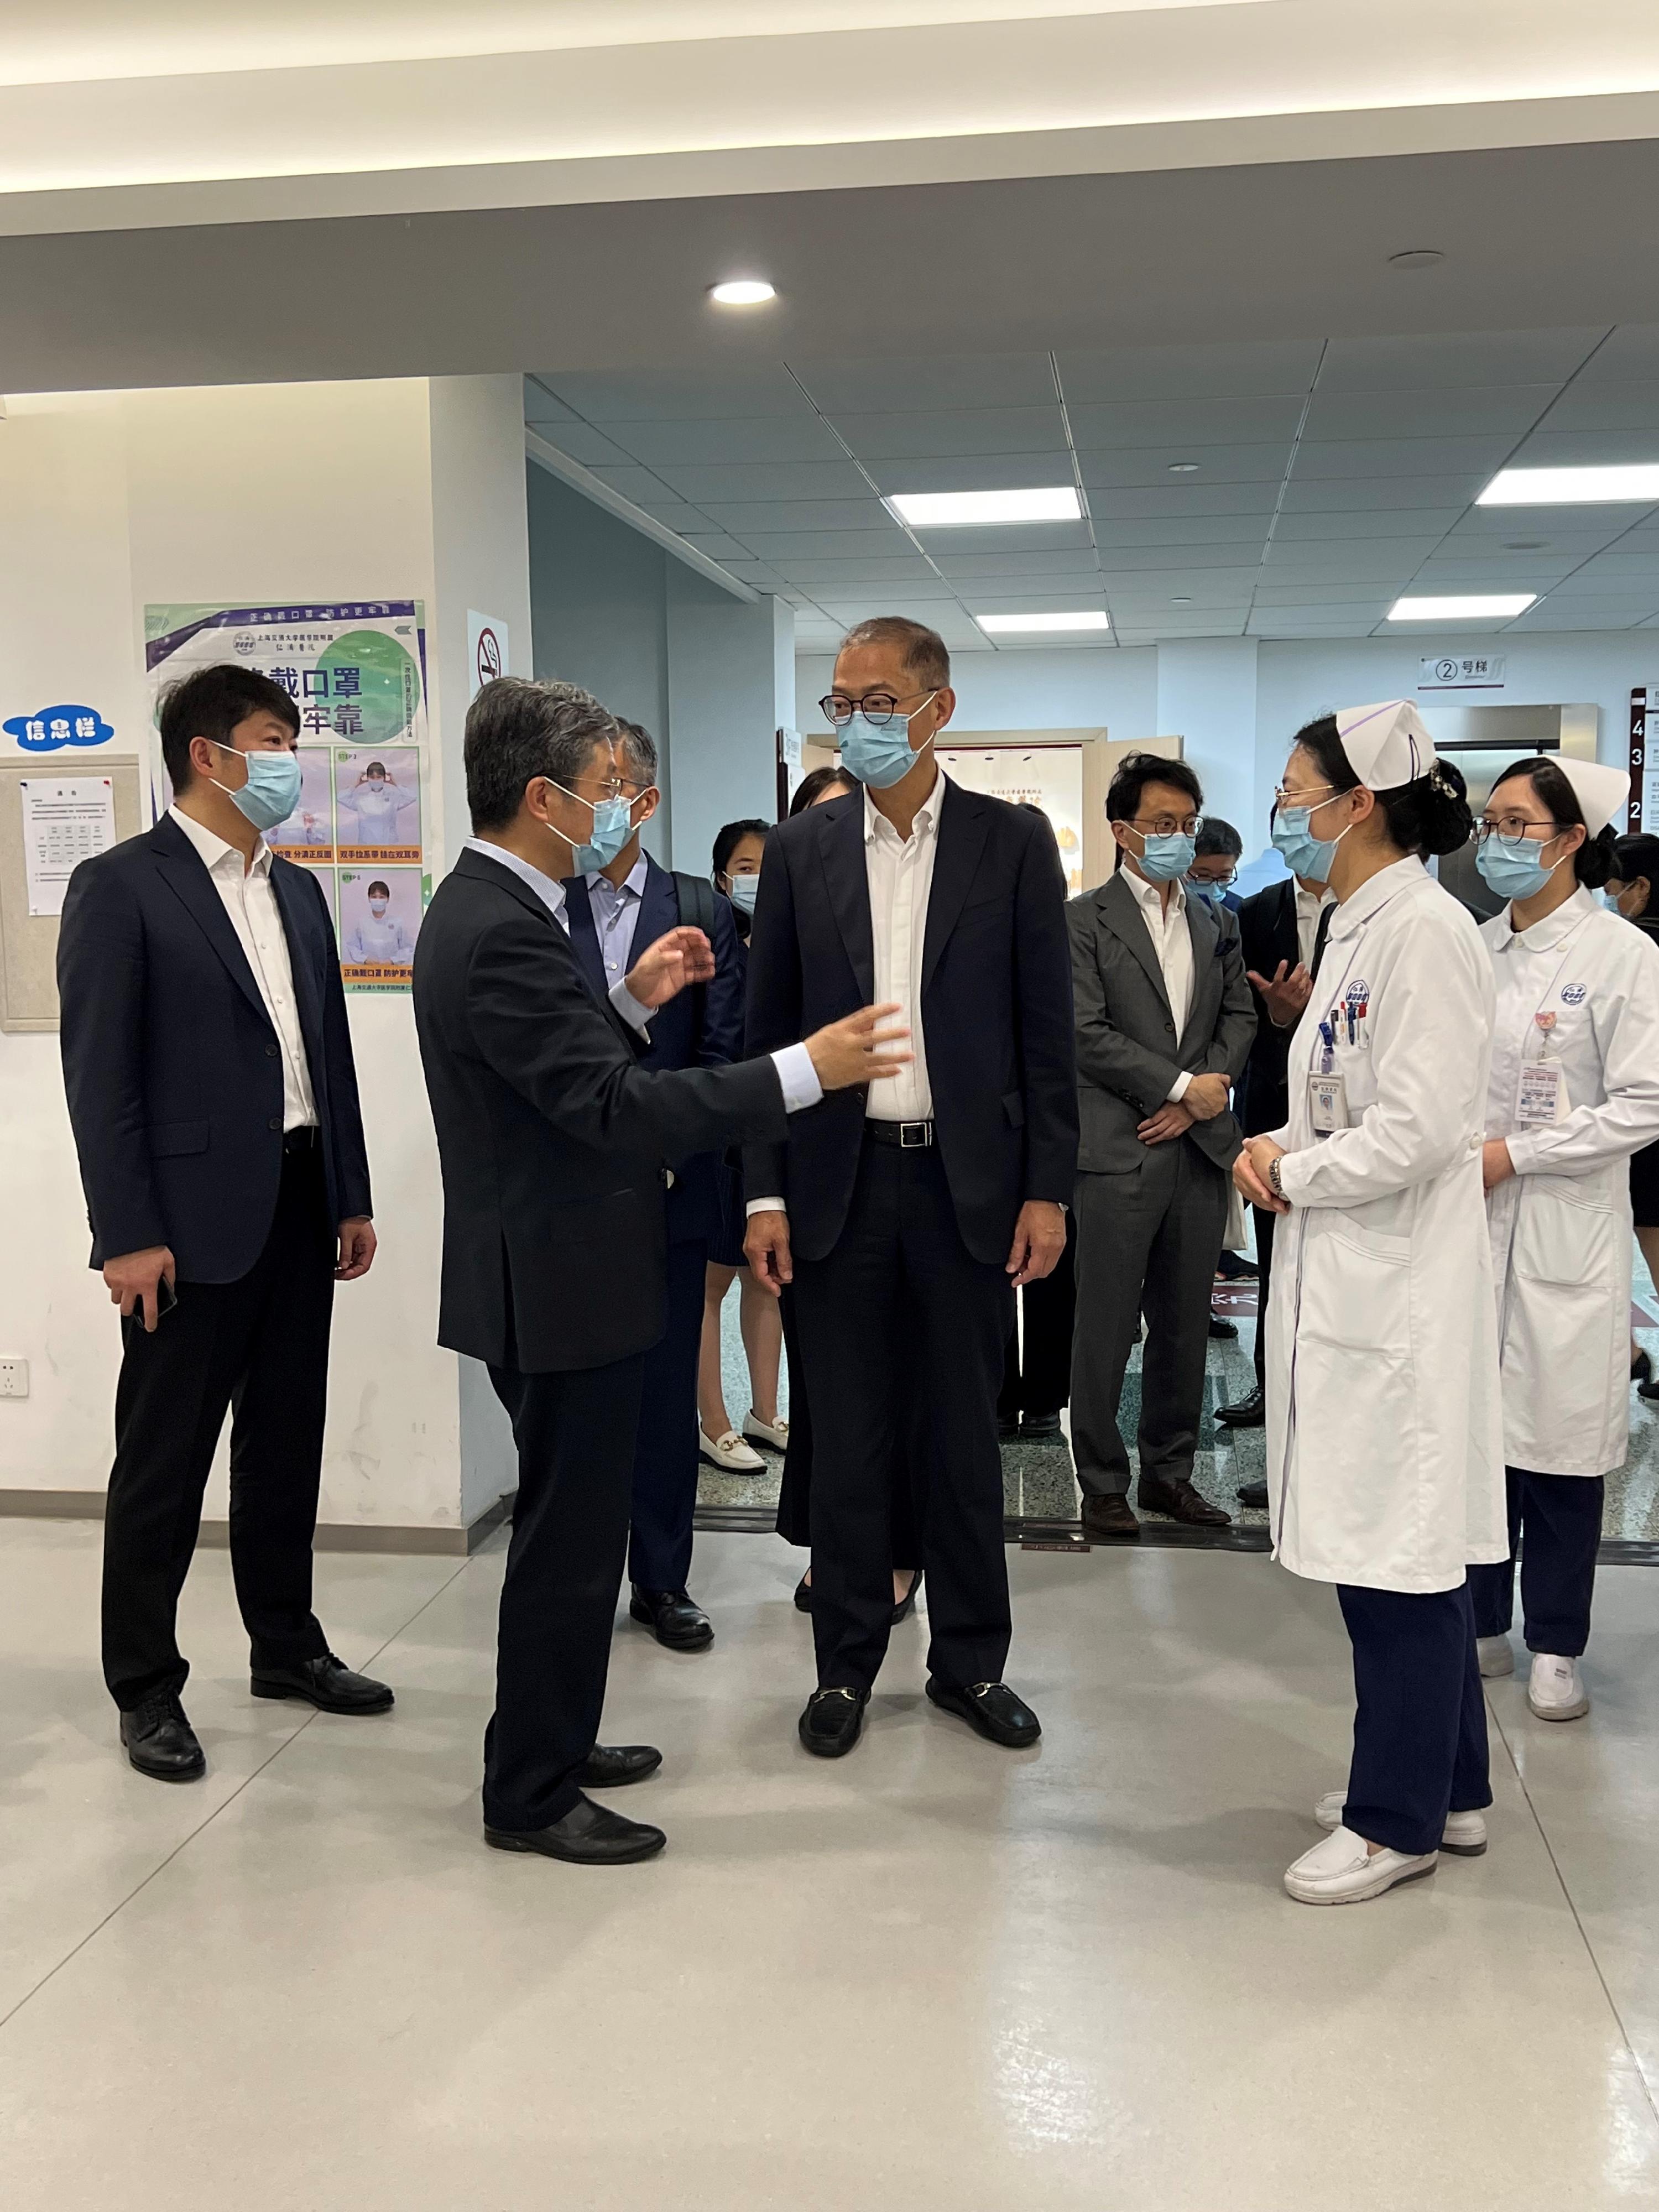 The Secretary for Health, Professor Lo Chung-mau (centre), pays a visit to the Comprehensive Cancer Center of the Renji Hospital affiliated to Shanghai Jiao Tong University School of Medicine this morning (June 9) to learn about the daily operation of the Center.